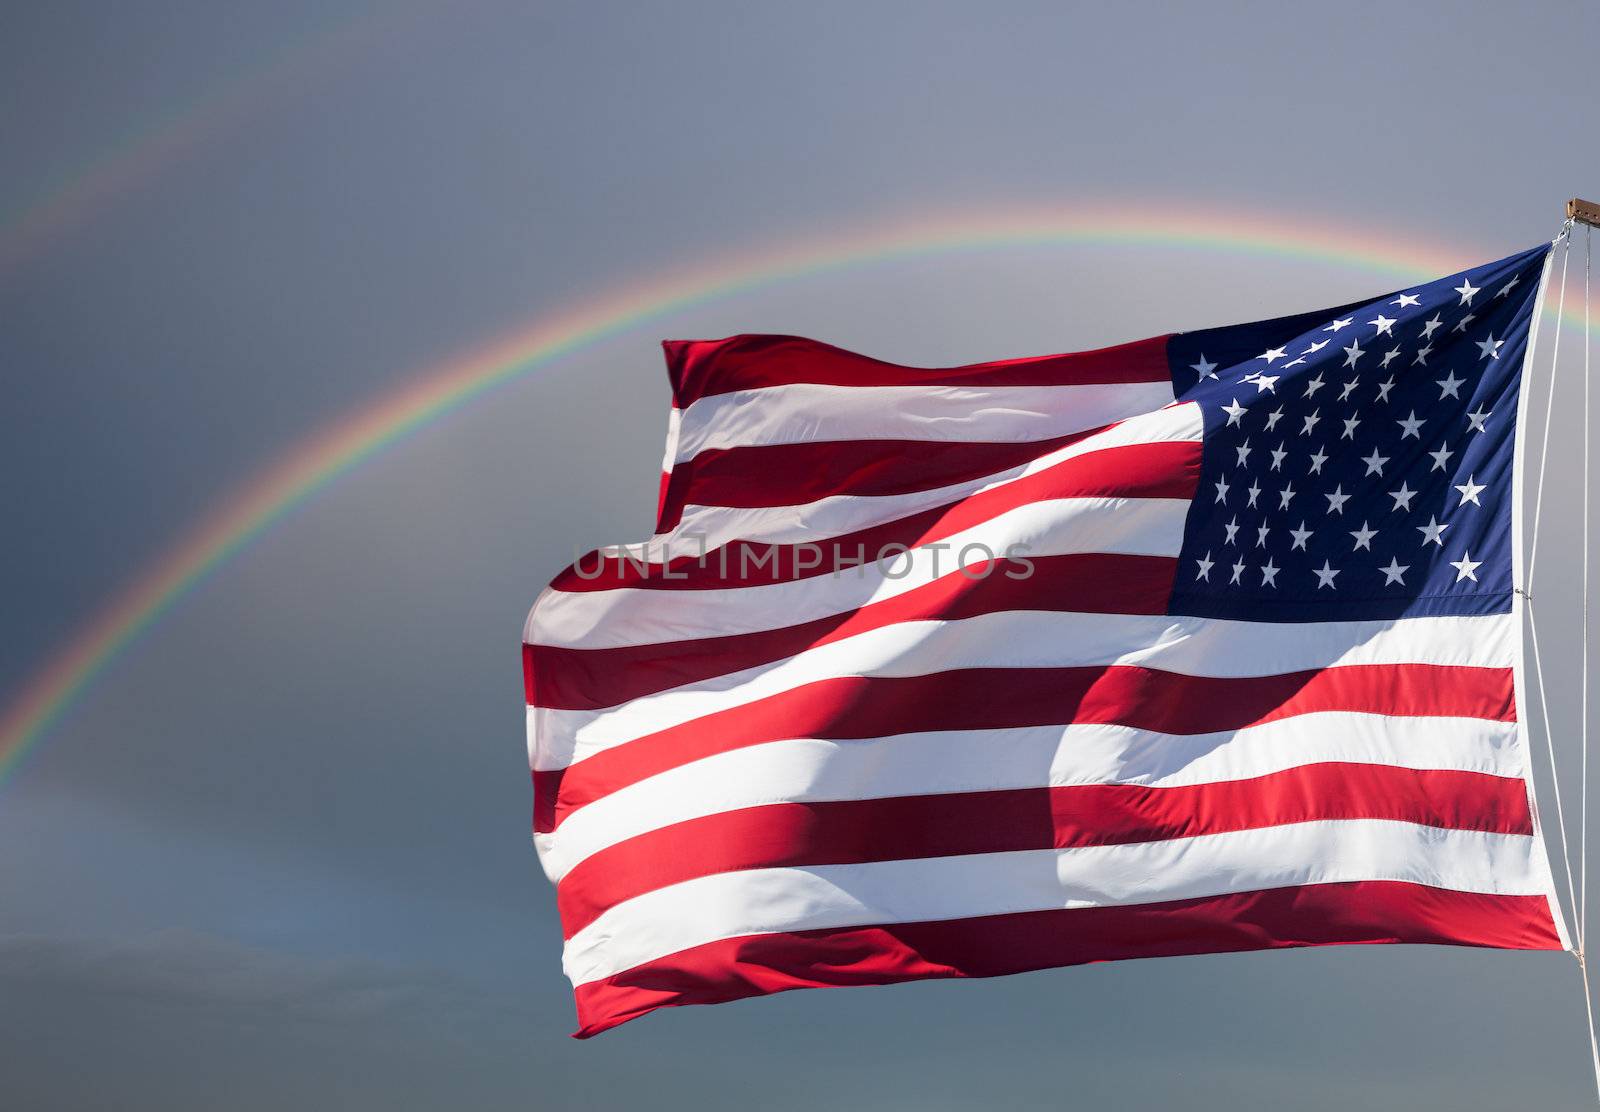 American flag against a cloudy sky with a rainbow by palinchak